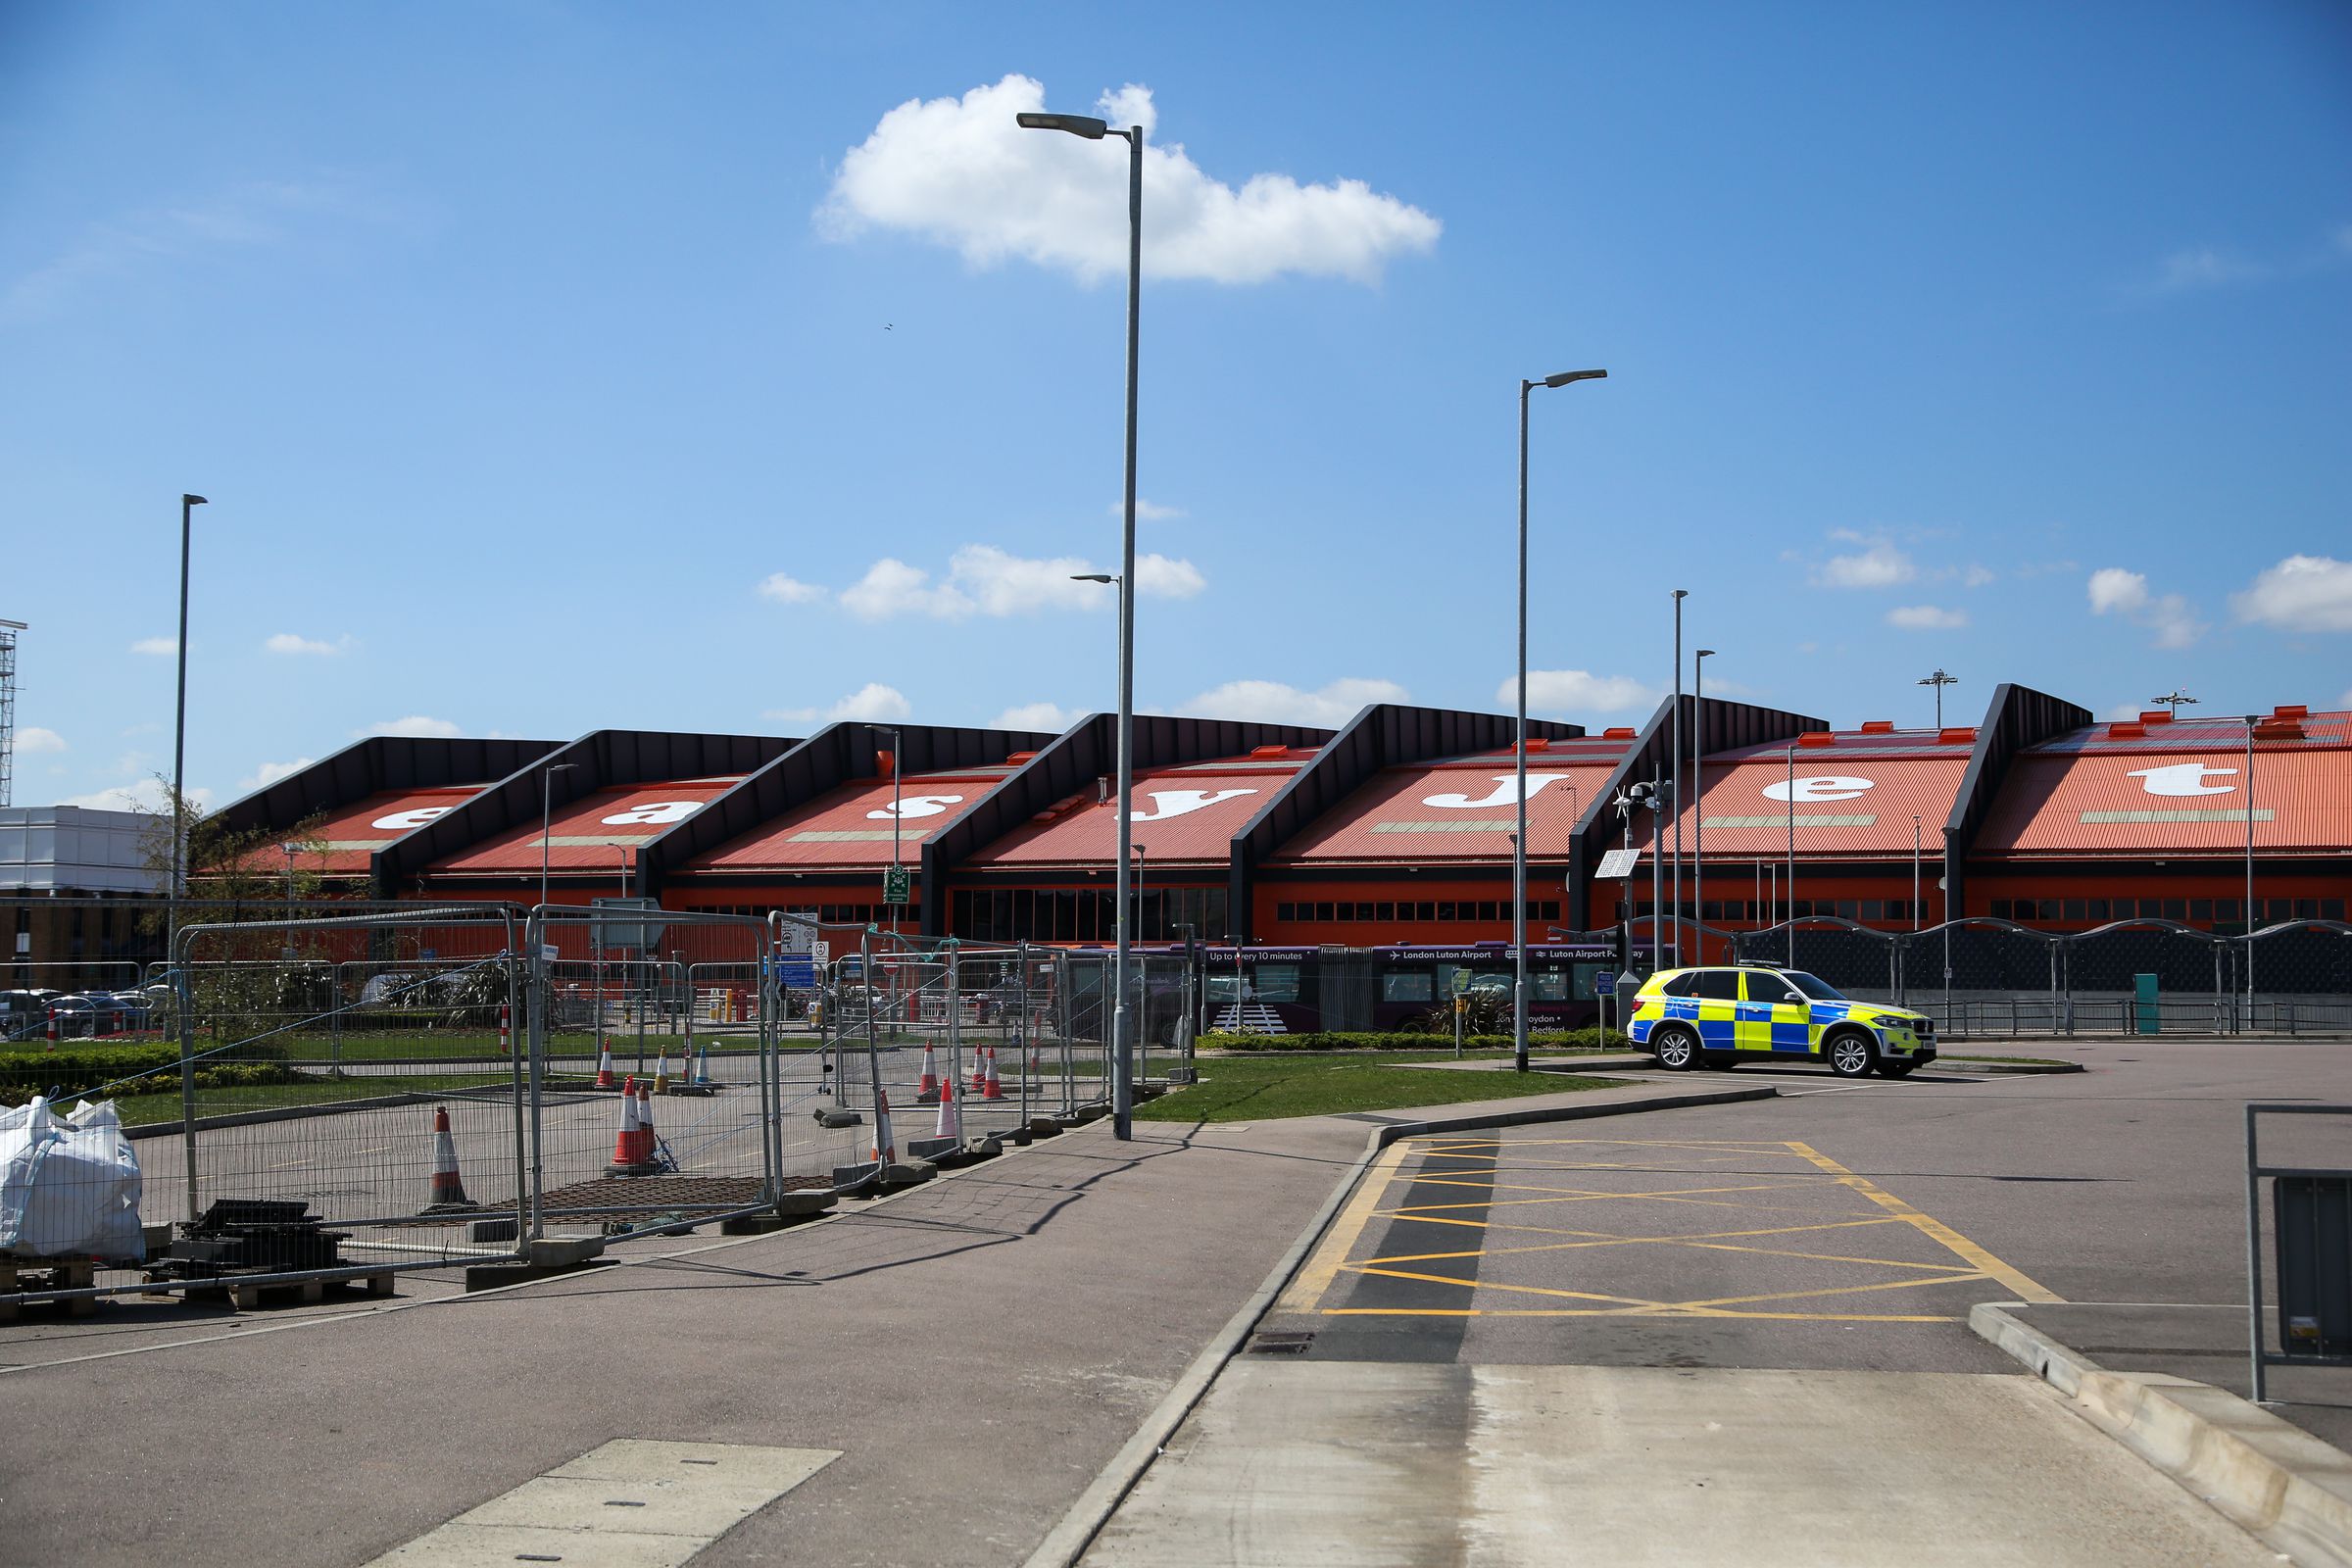 An exterior view of the entrance to the London Luton Airport...